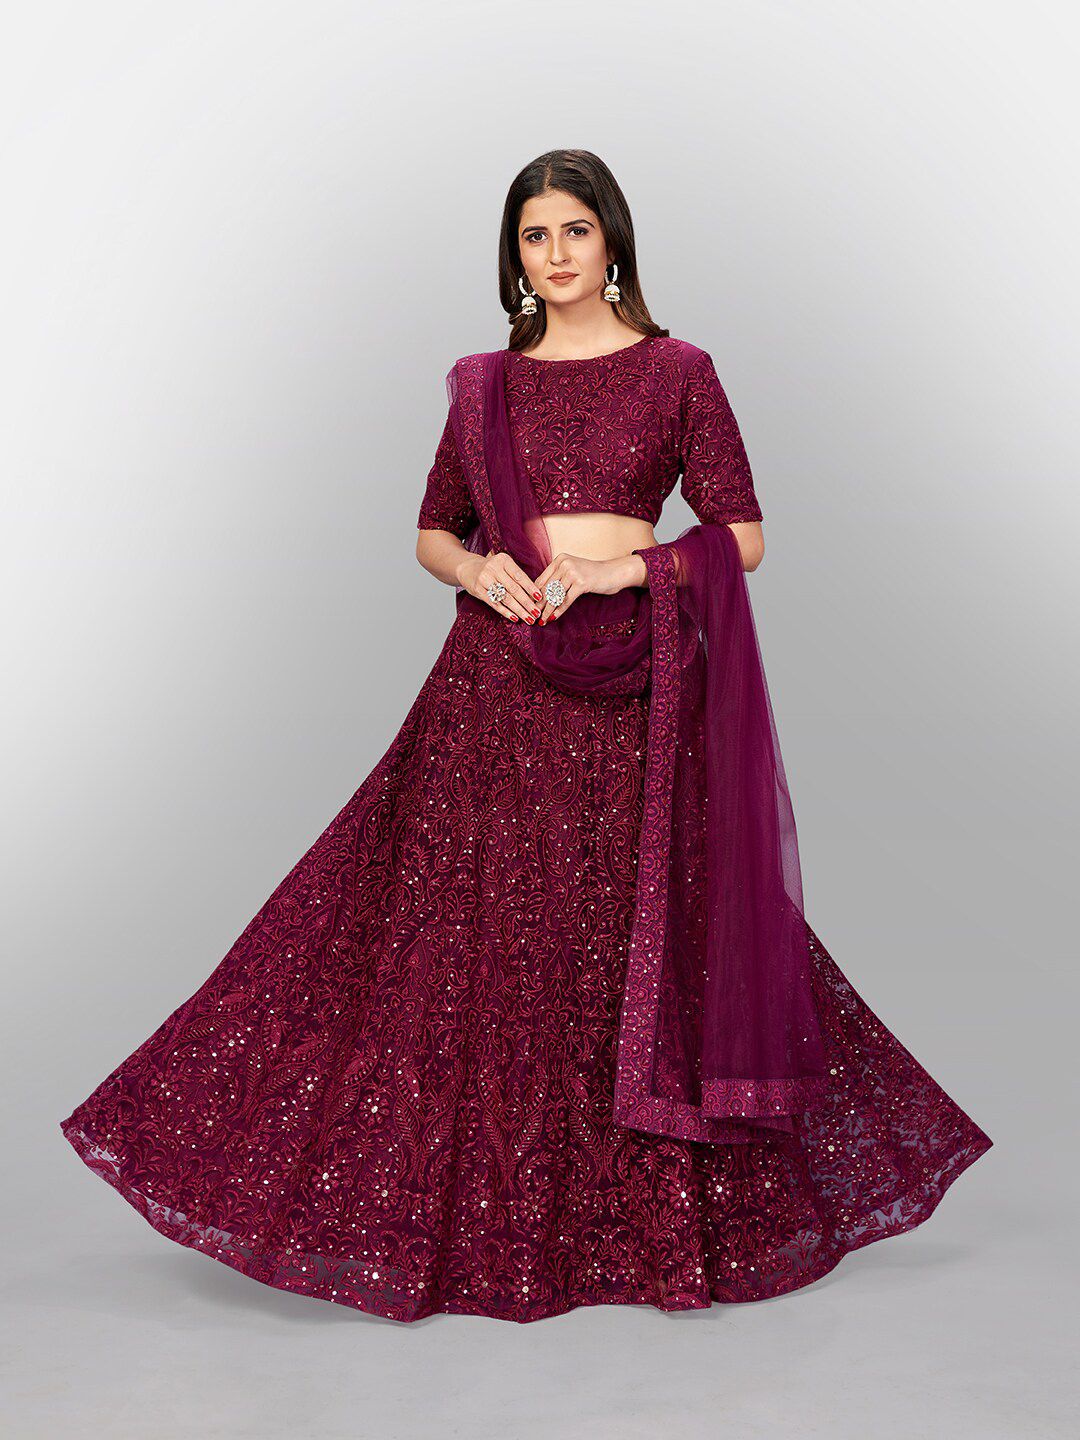 SHOPGARB Burgundy & Silver Toned Semi-Stitched Lehenga & Unstitched Blouse with Dupatta Price in India